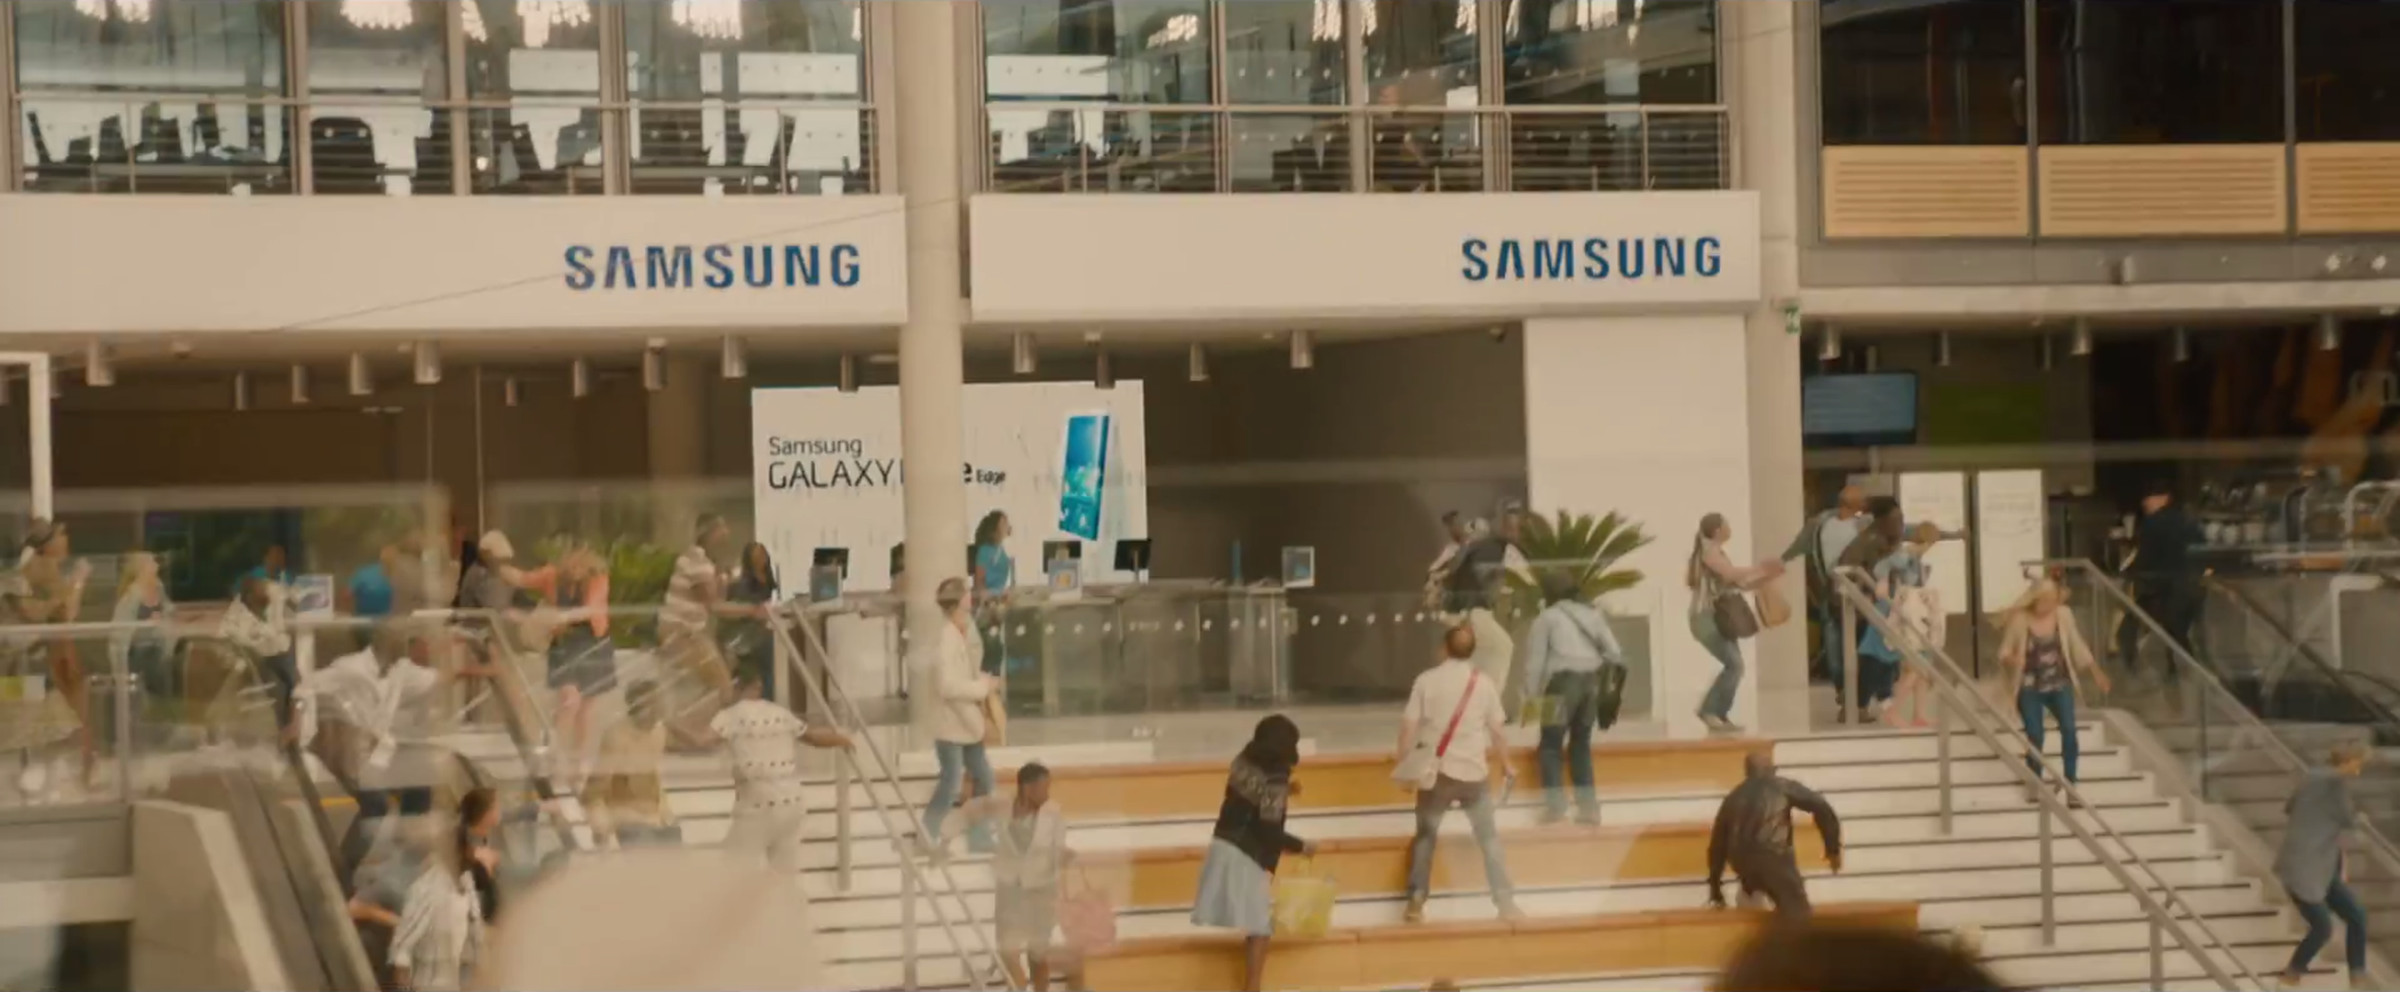 samsung ultron product placement